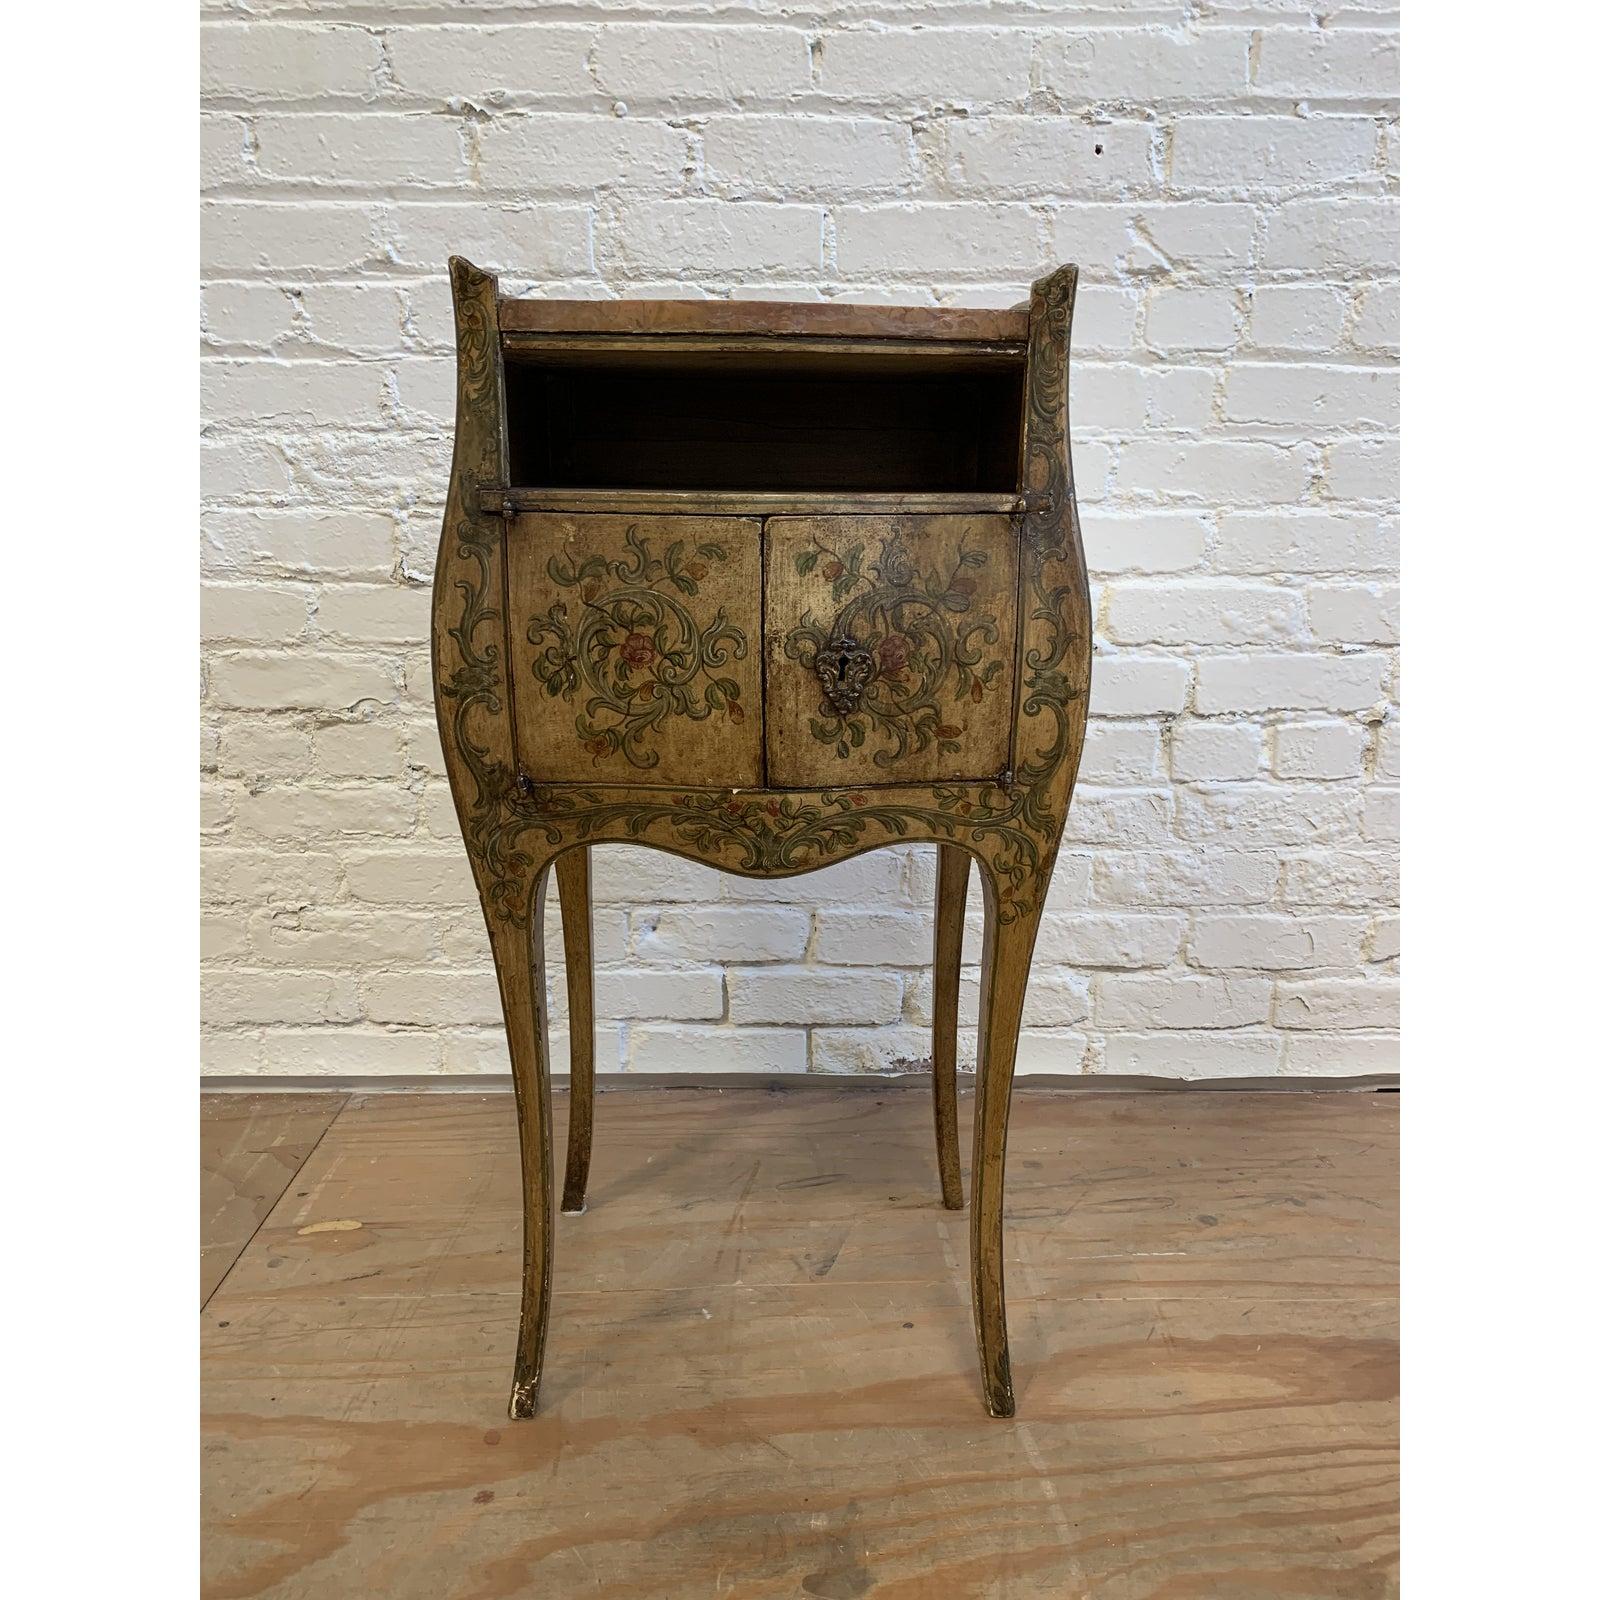 A French inspired hand painted side cabinet and marble top. Floral and vine motifs surround the curvy antiqued frame. Doors reveal open storage inside and adorn brass keyhole (key not included.) Marble top in addition to frame have visible wear and